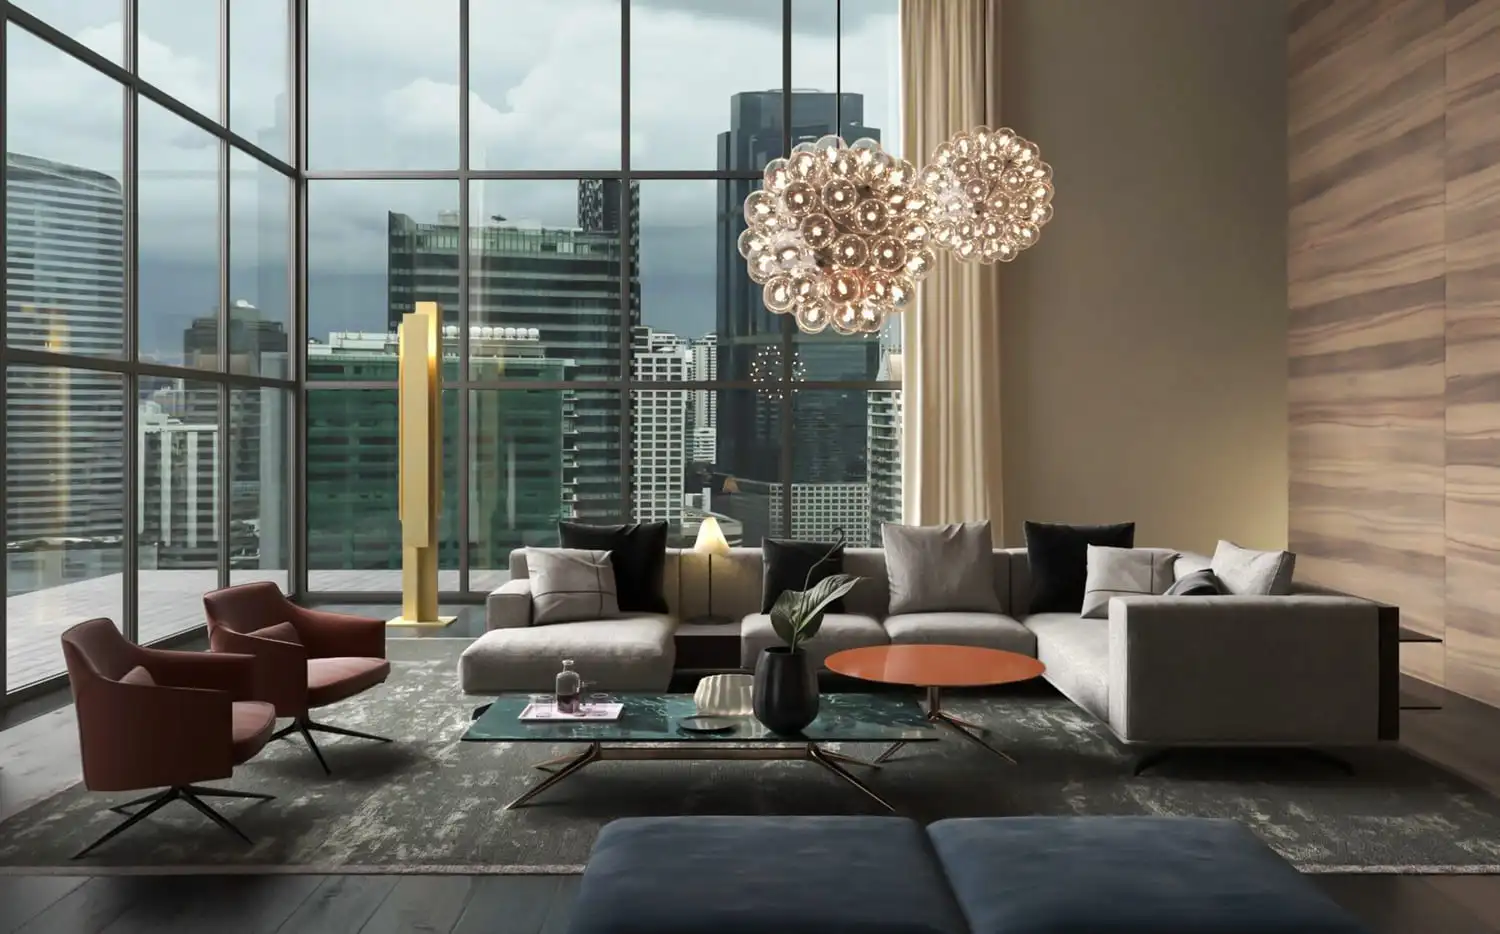 Bespoke residential interior design services in Dubai by RCi Red Chillies Interiors LLC, showcasing a luxurious living room with floor-to-ceiling windows, modern gray sofas, elegant red chairs, and a statement chandelier with a Dubai cityscape view